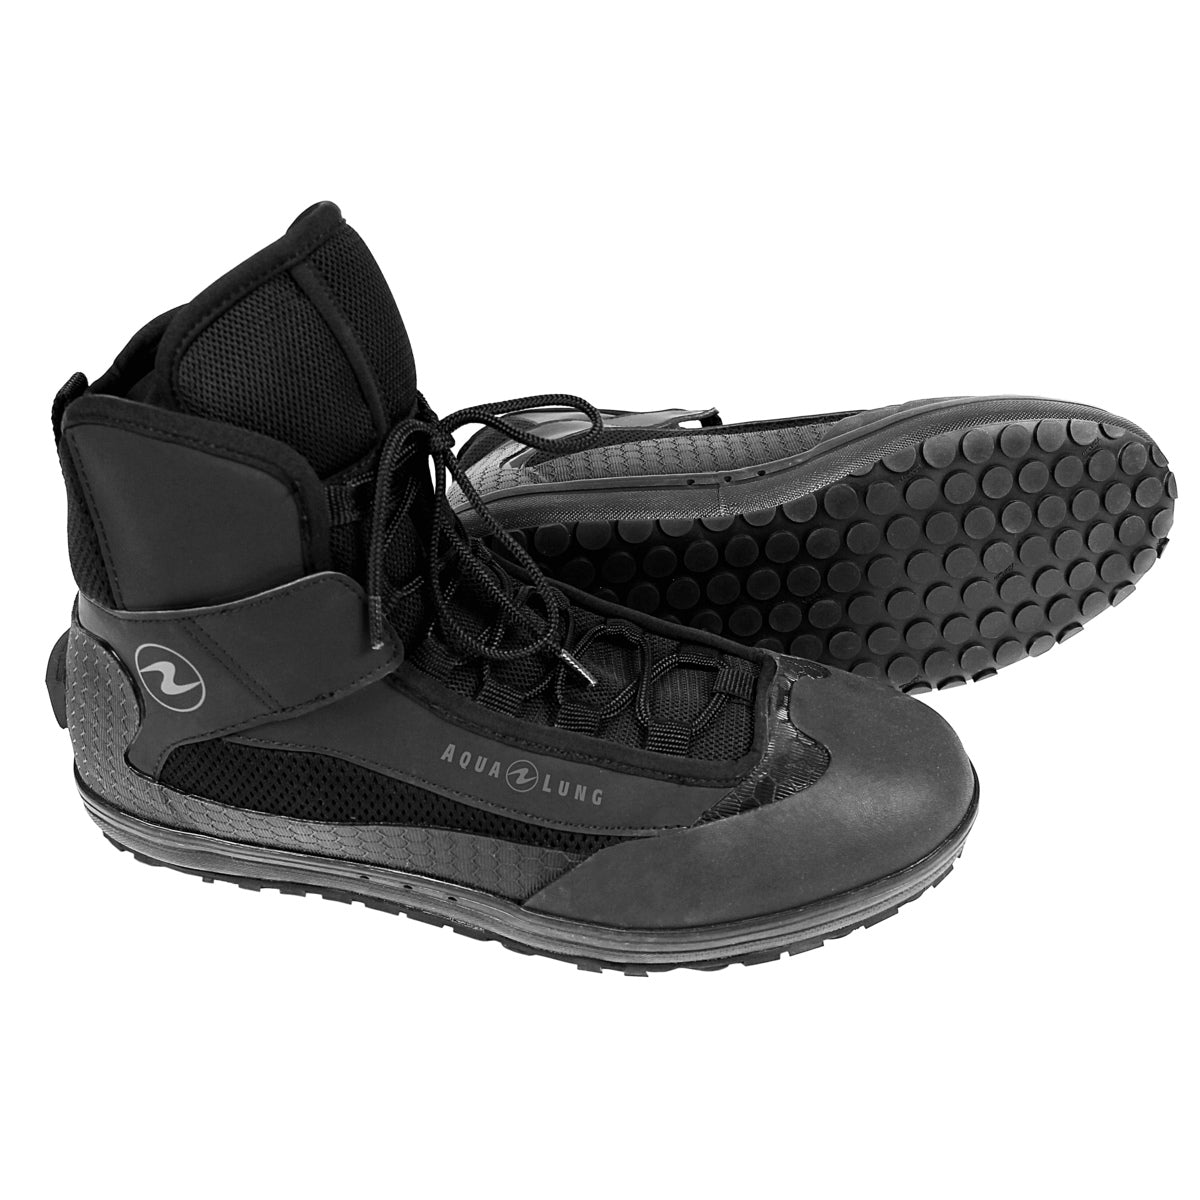 Aqualung Aqualung Evo4 Boots by Oyster Diving Shop